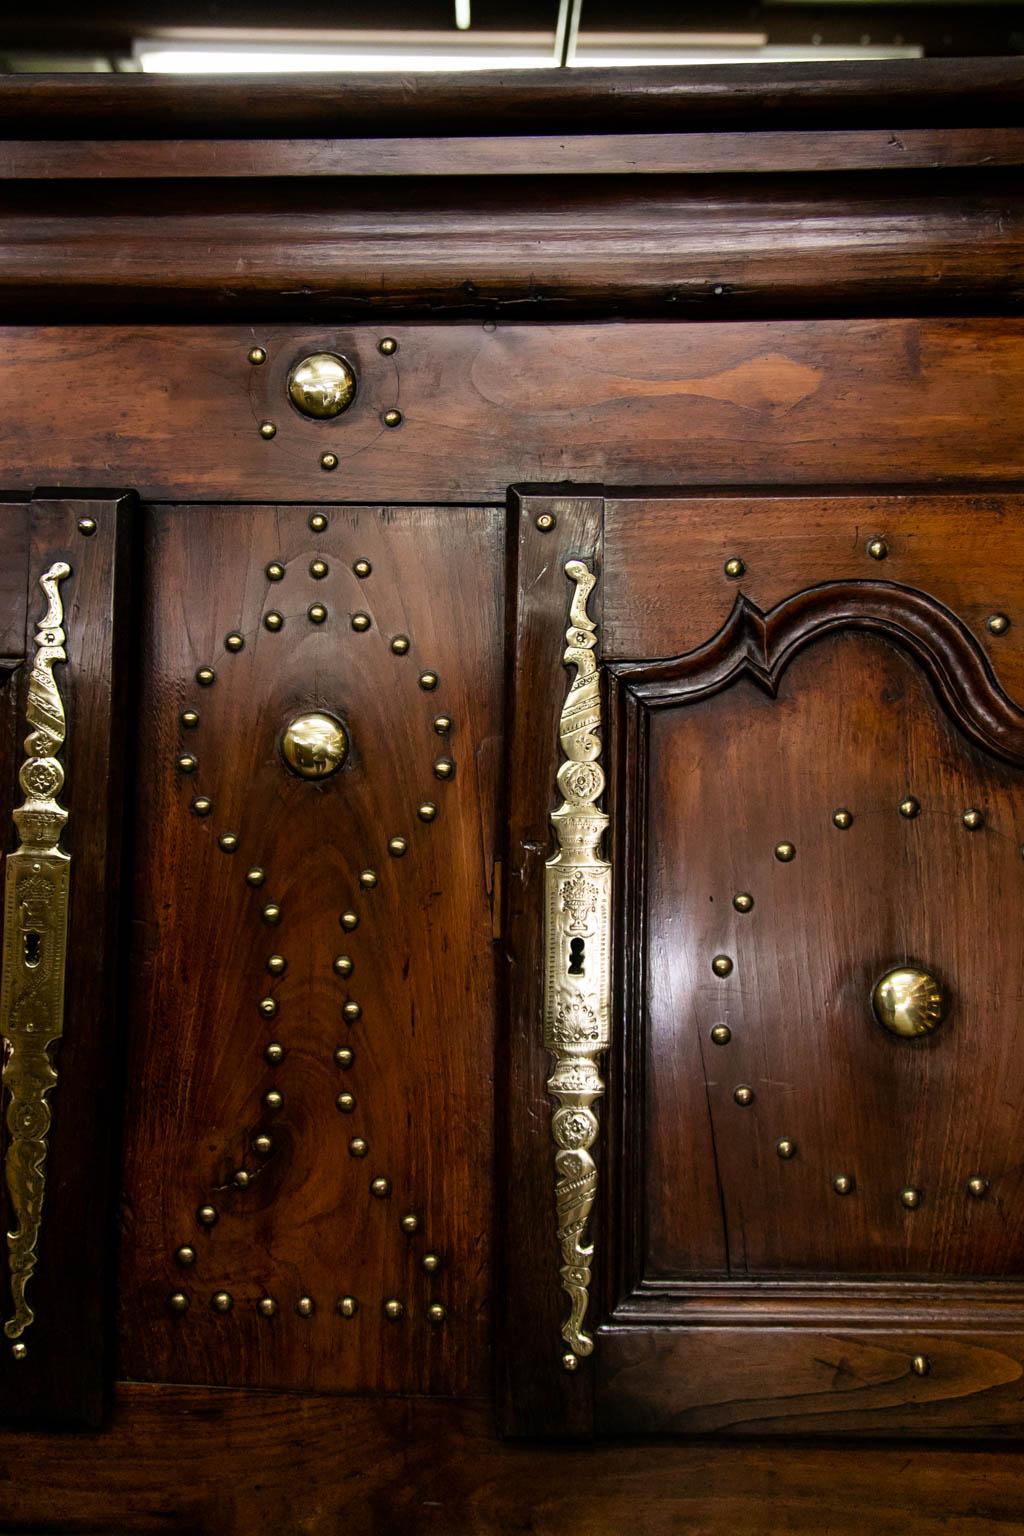 This four door/two drawer cupboard has exposed peg construction throughout. The sides each have five recessed panels. The engraved brass escutcheons and other hardware are original. The top section has a central divider and one fixed shelf in each